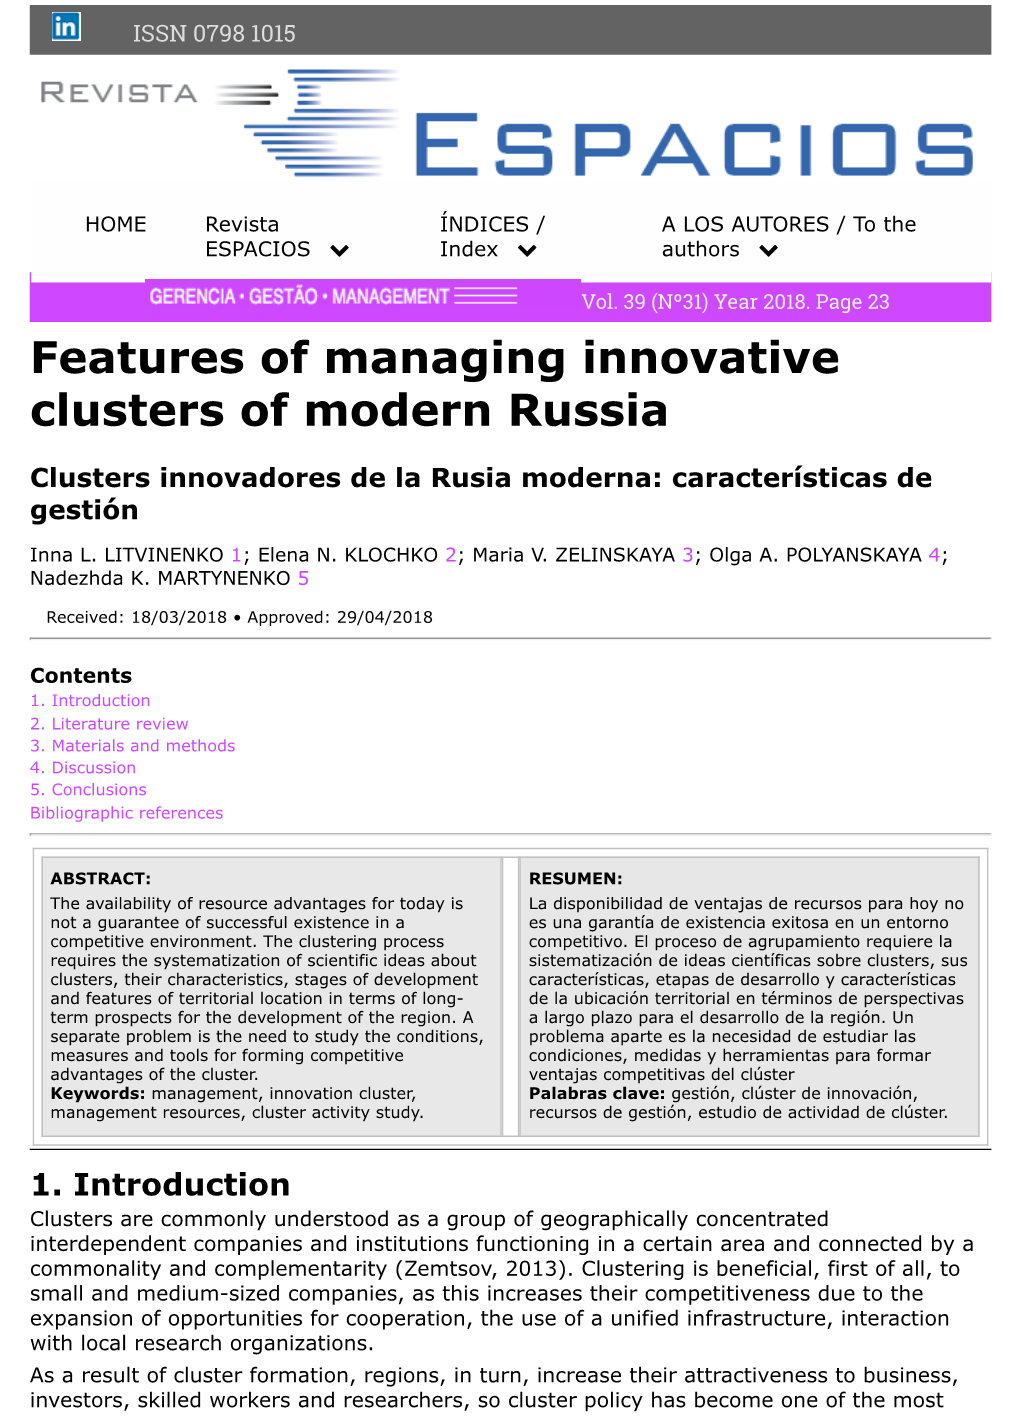 Features of Managing Innovative Clusters of Modern Russia